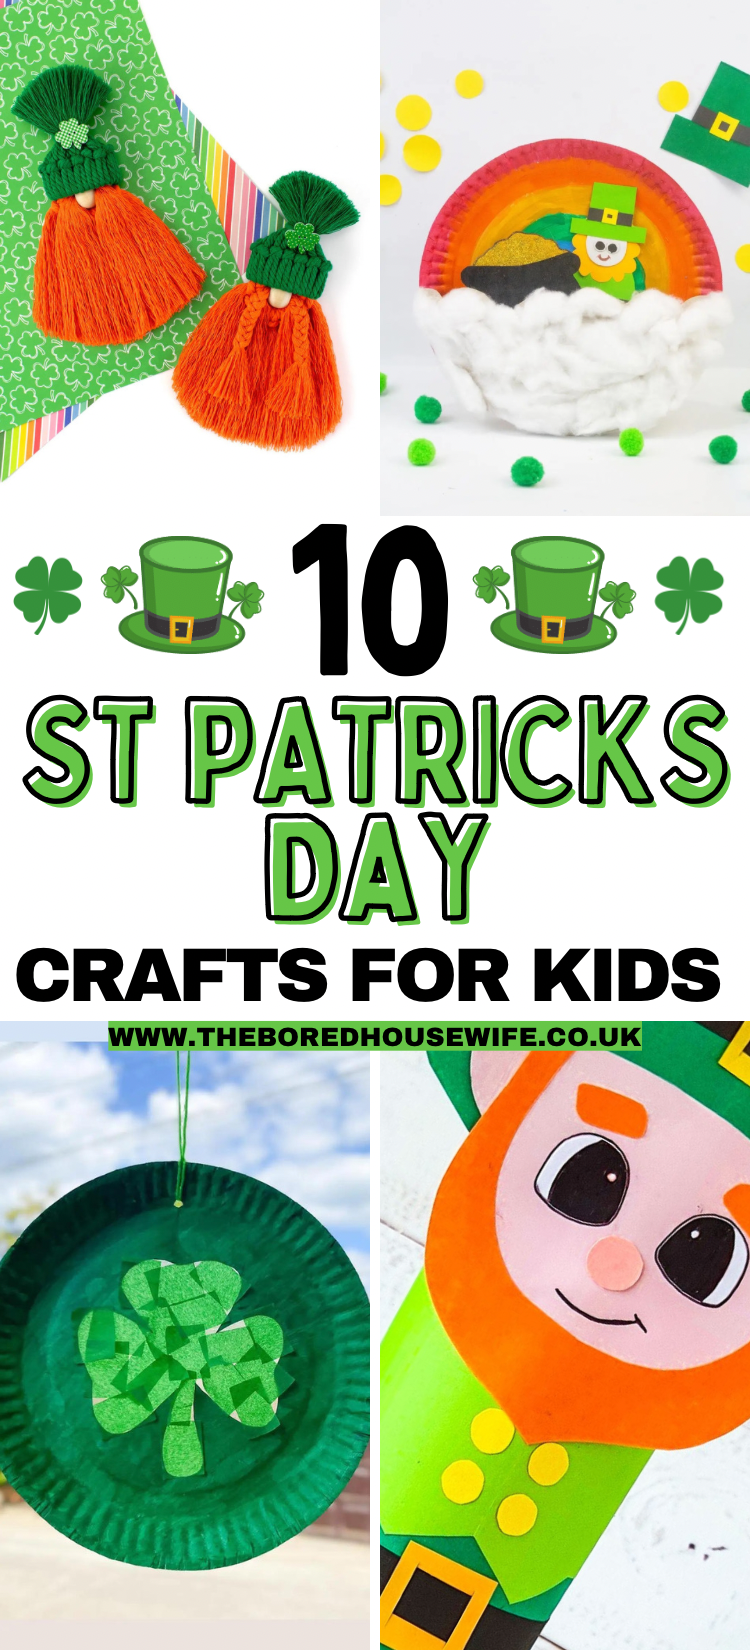 10 Simple St Patrick’s Day Crafts For Kids